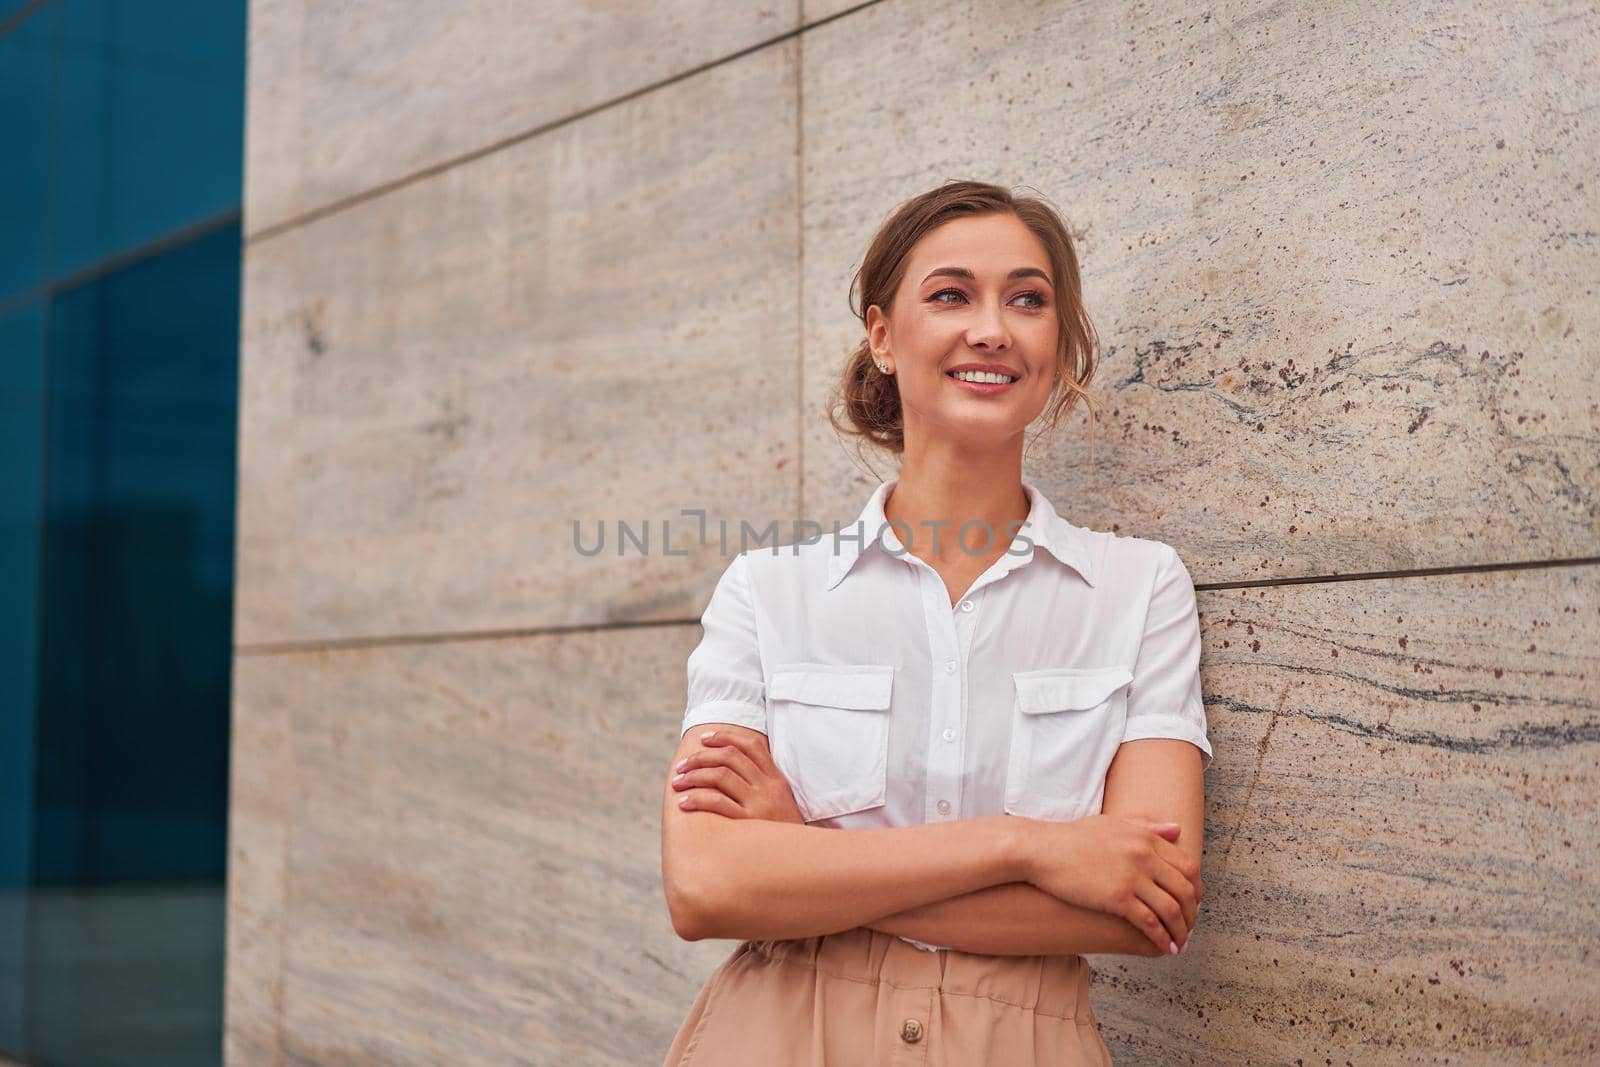 Businesswoman successful woman business person standing arms crossed outdoor corporate building exterior Smile happy caucasian confidence professional business woman middle age female entrepreneur